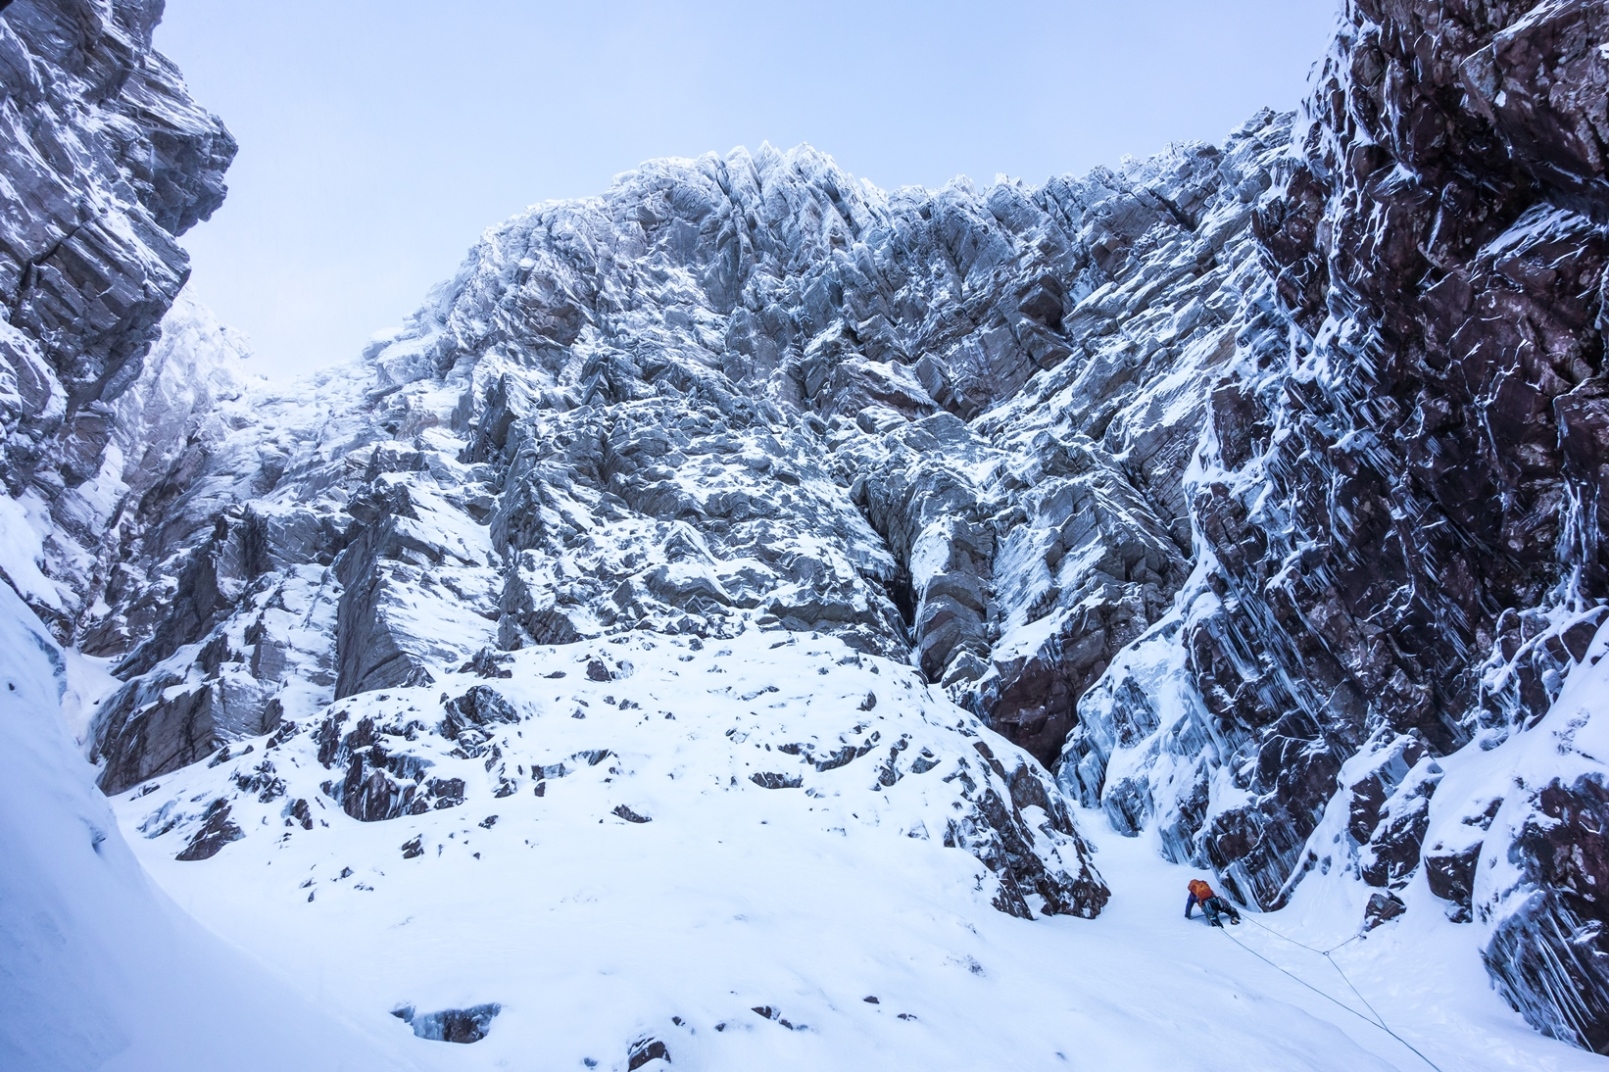 Breathtaking surroundings on the West Central Gully start 